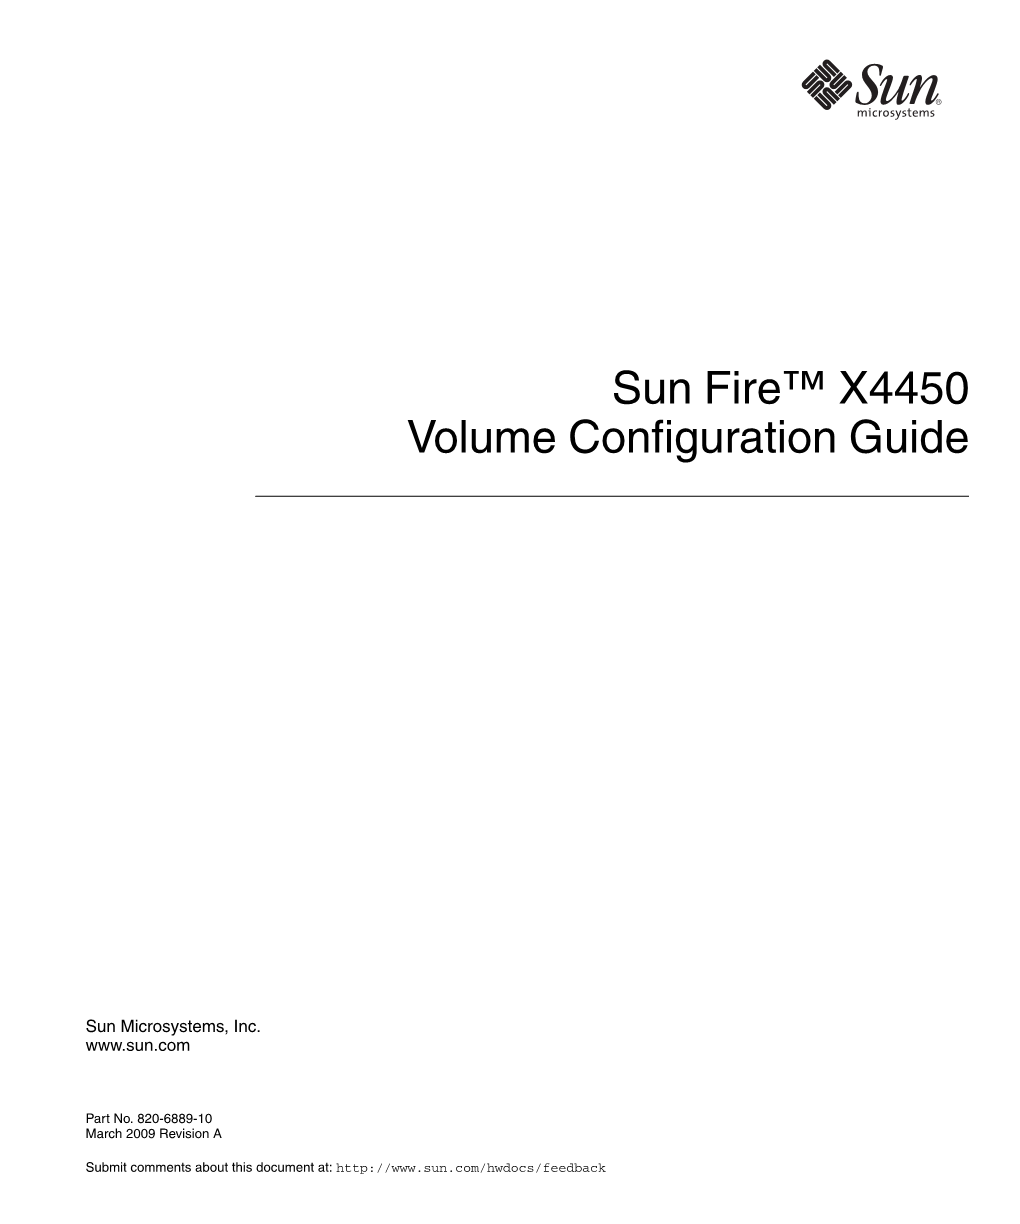 Sun Fire X4450 Volume Configuration Guide • March 2009 Install Dimms According to the Following Map